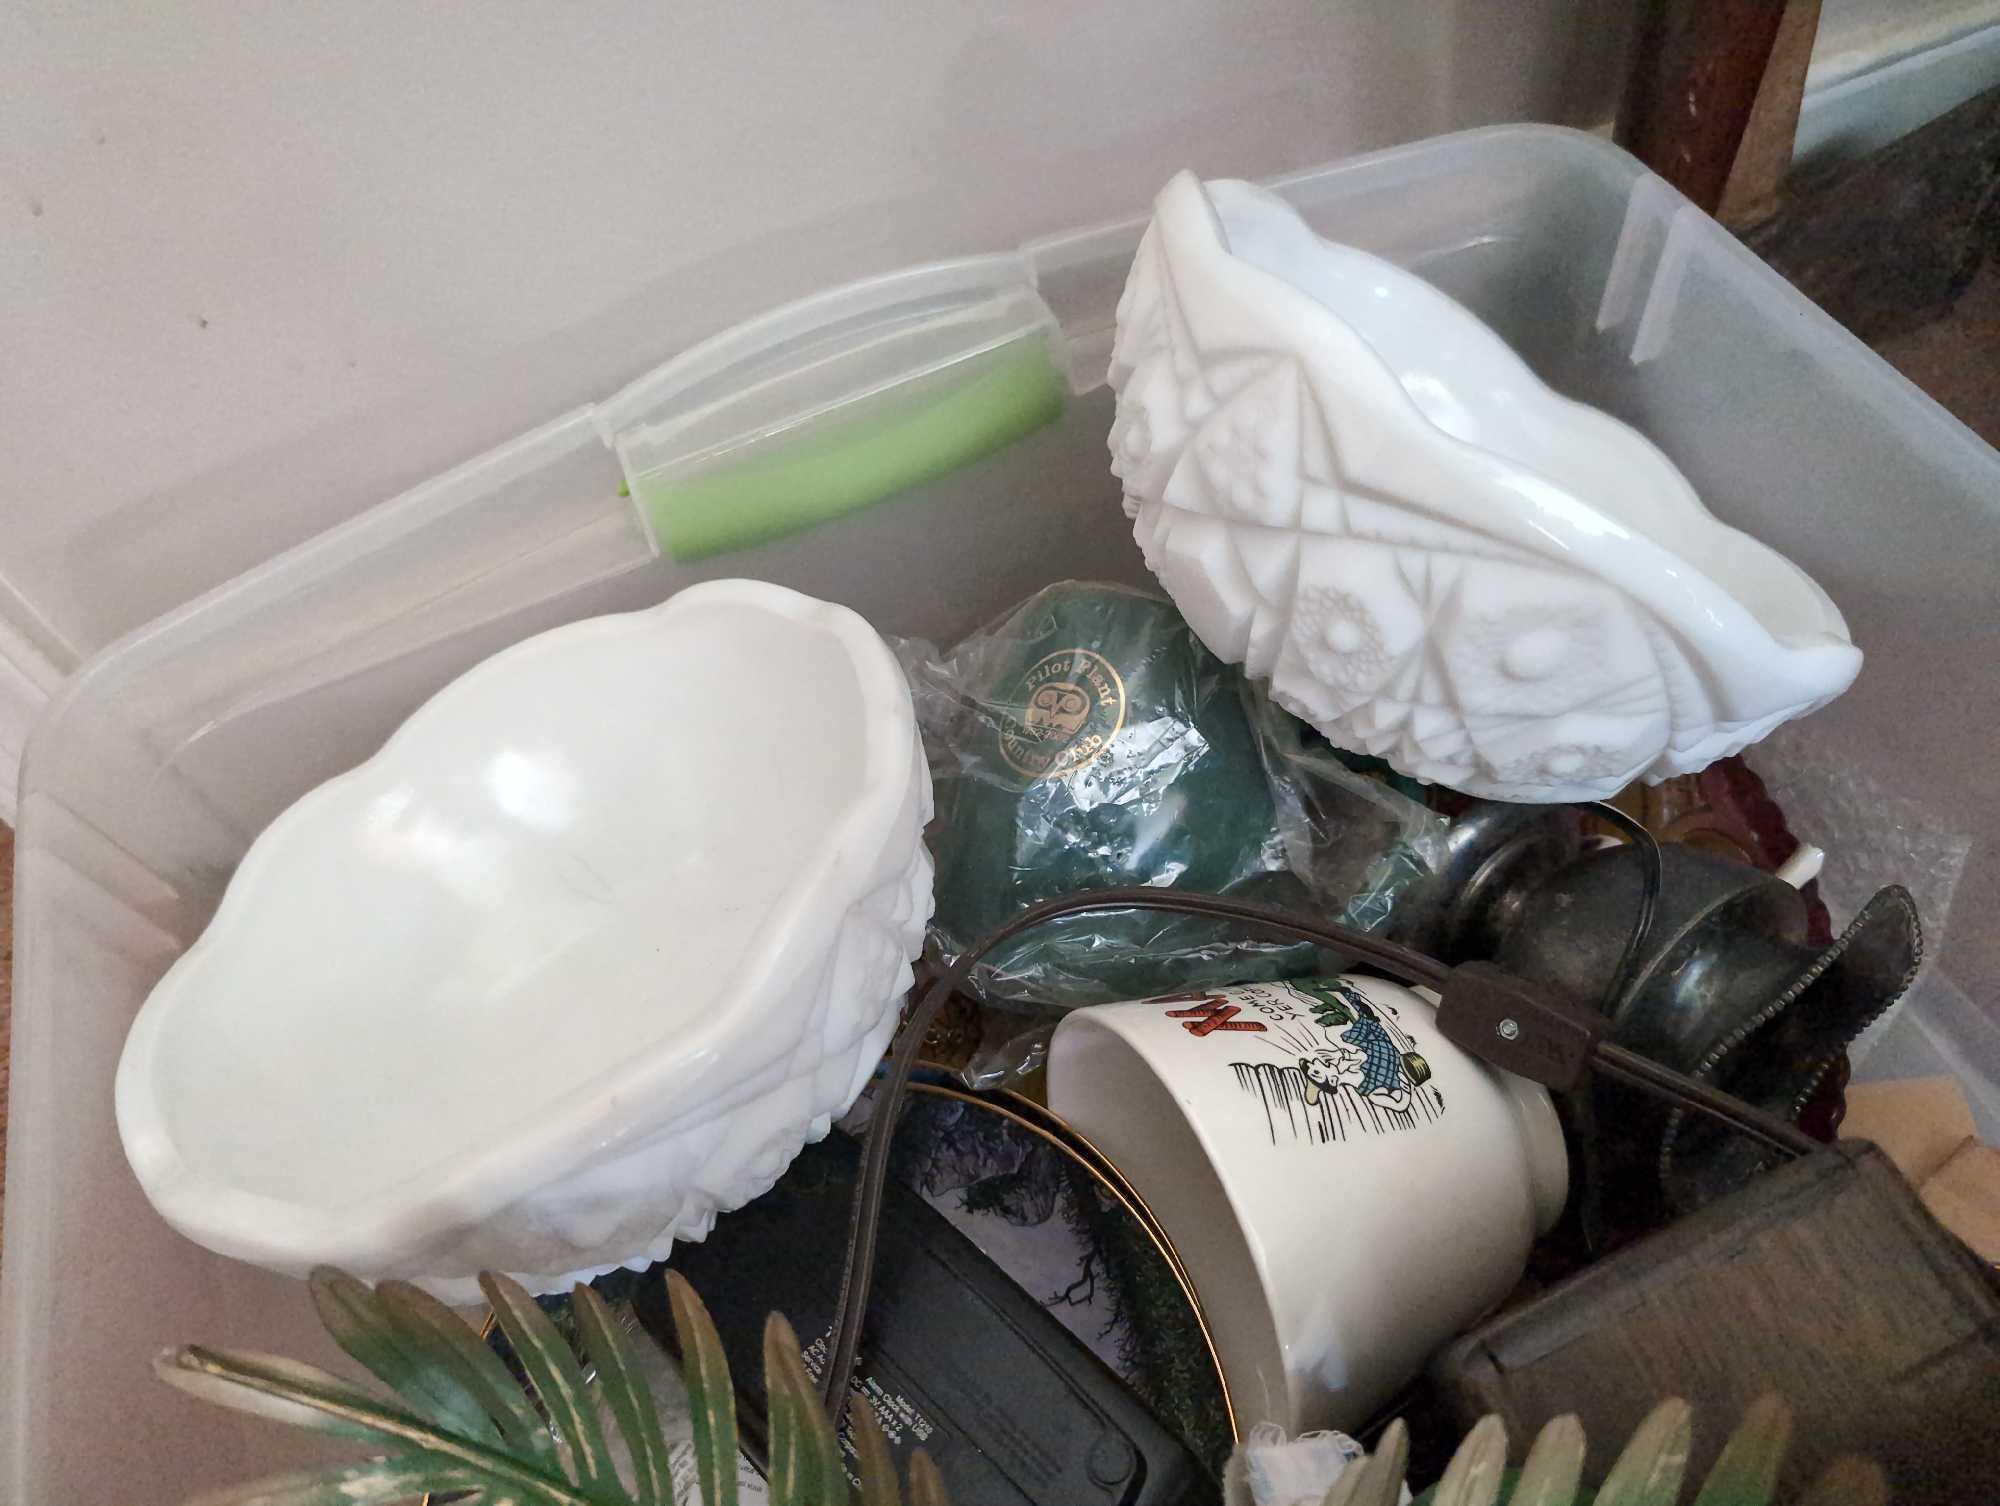 (LR) TUB LOT OF MISC. ITEMS TO INCLUDE (2) MILK GLASS BOWLS, A MILK GLASS CANDY DISH, RED GLASS